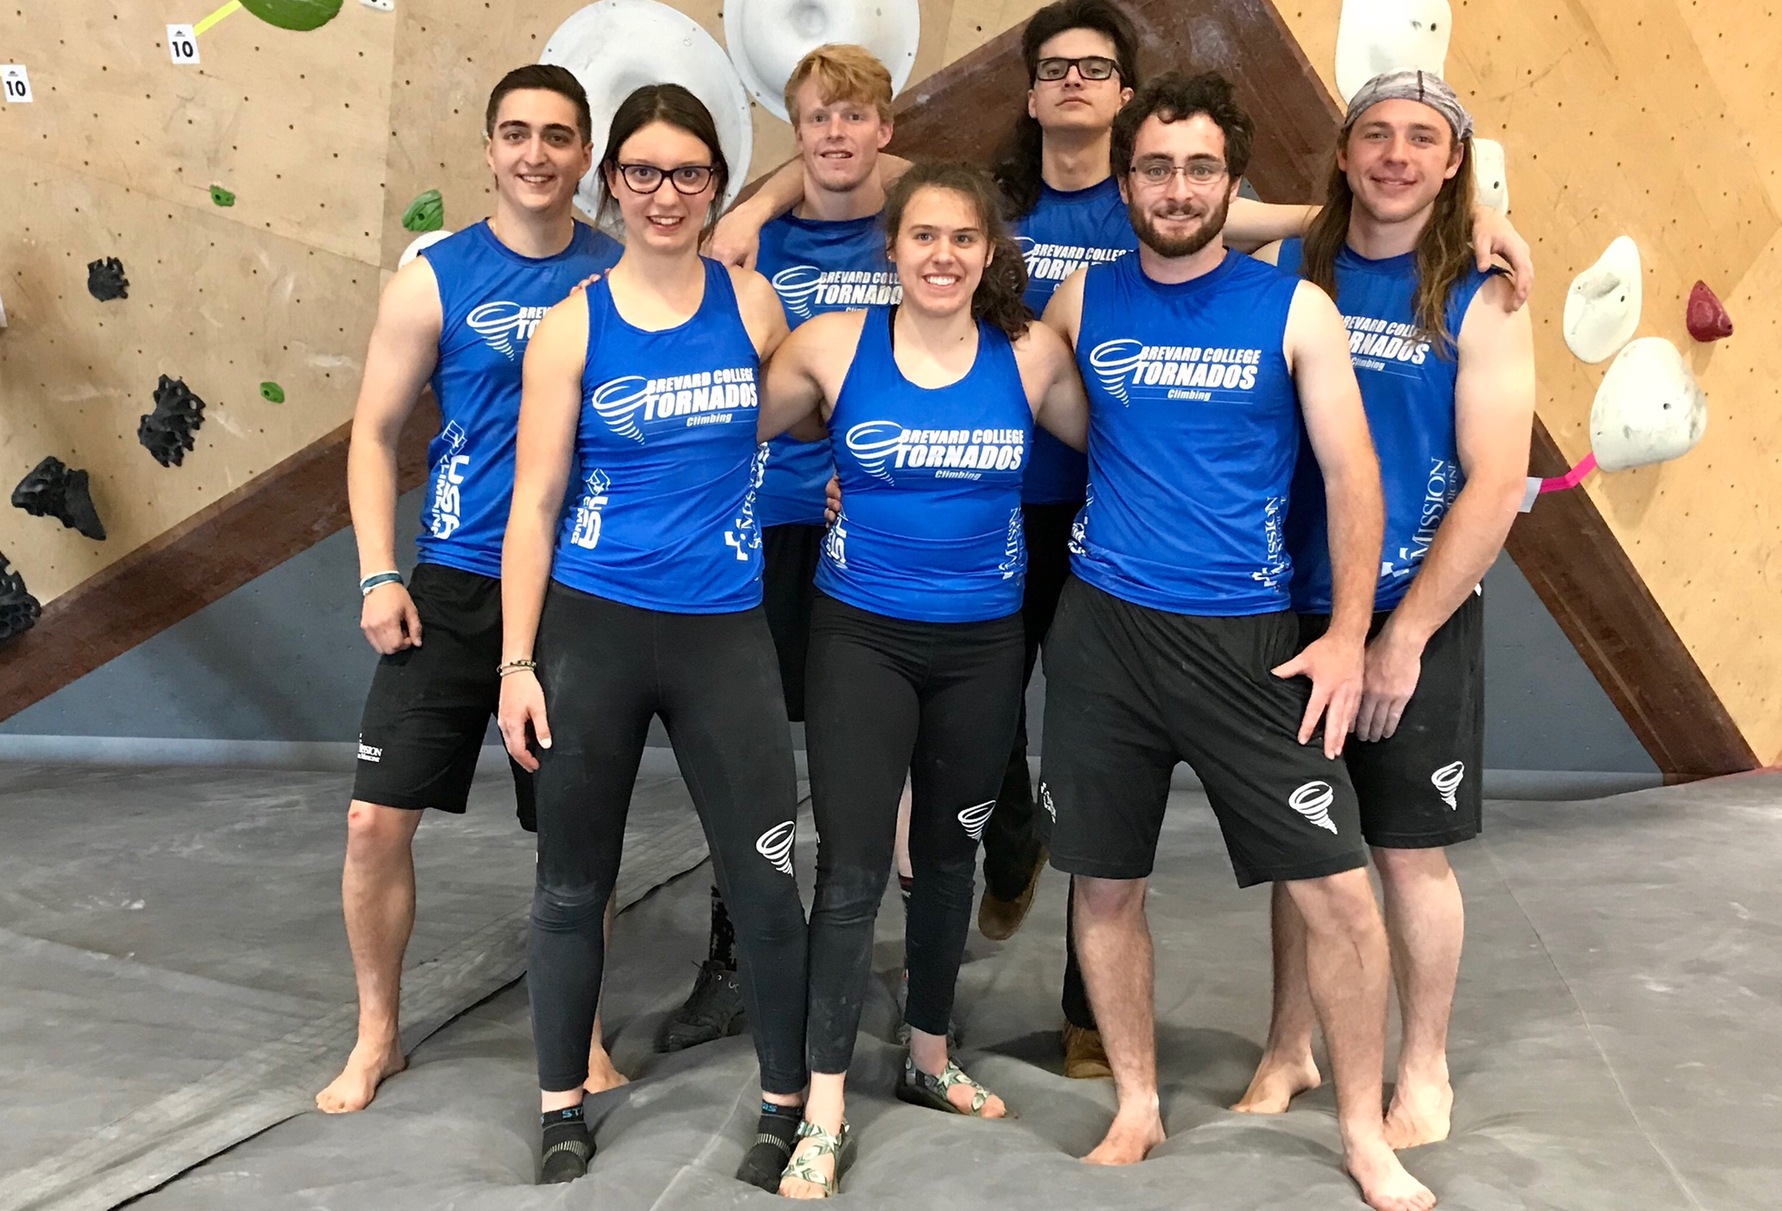 Altman Qualifies for Nationals, Brevard College Places Sixth at USA Climbing Regional Championships 